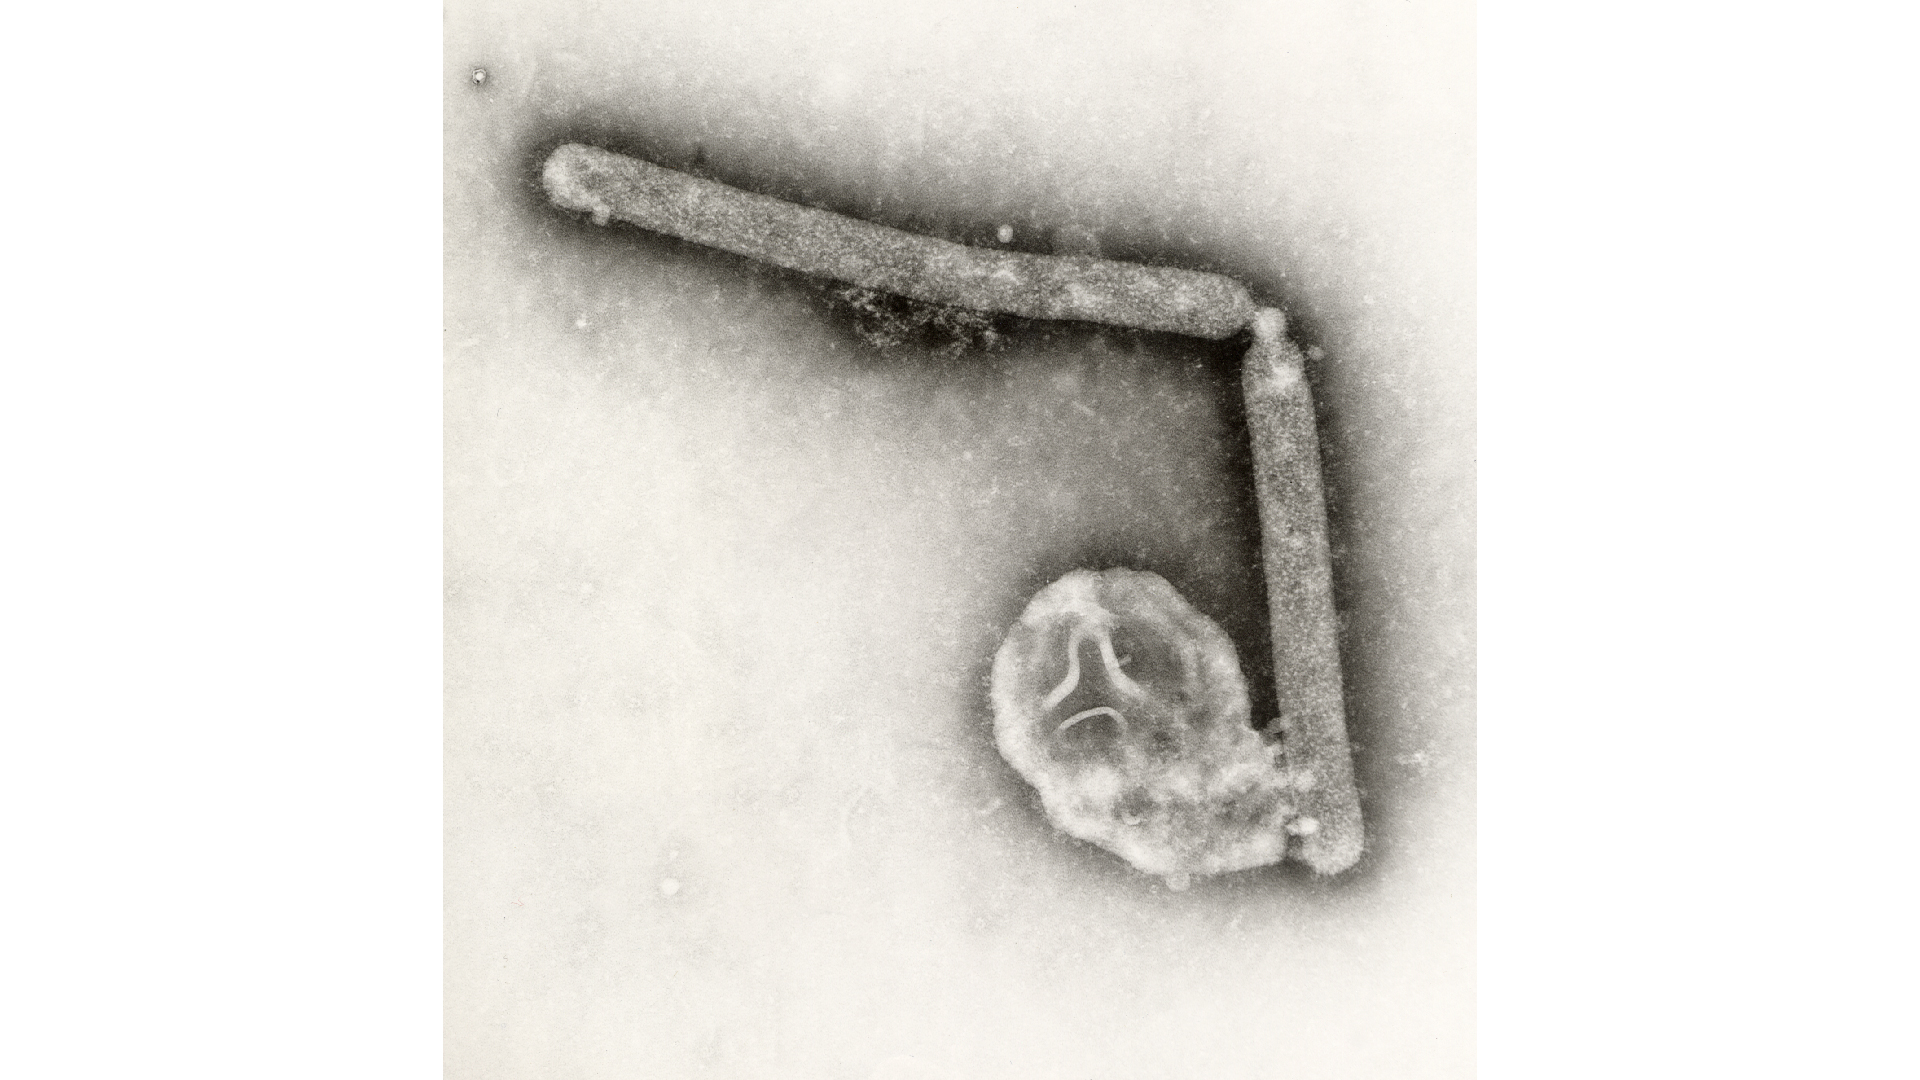 Black and white microscopic image of bird flu virus particles